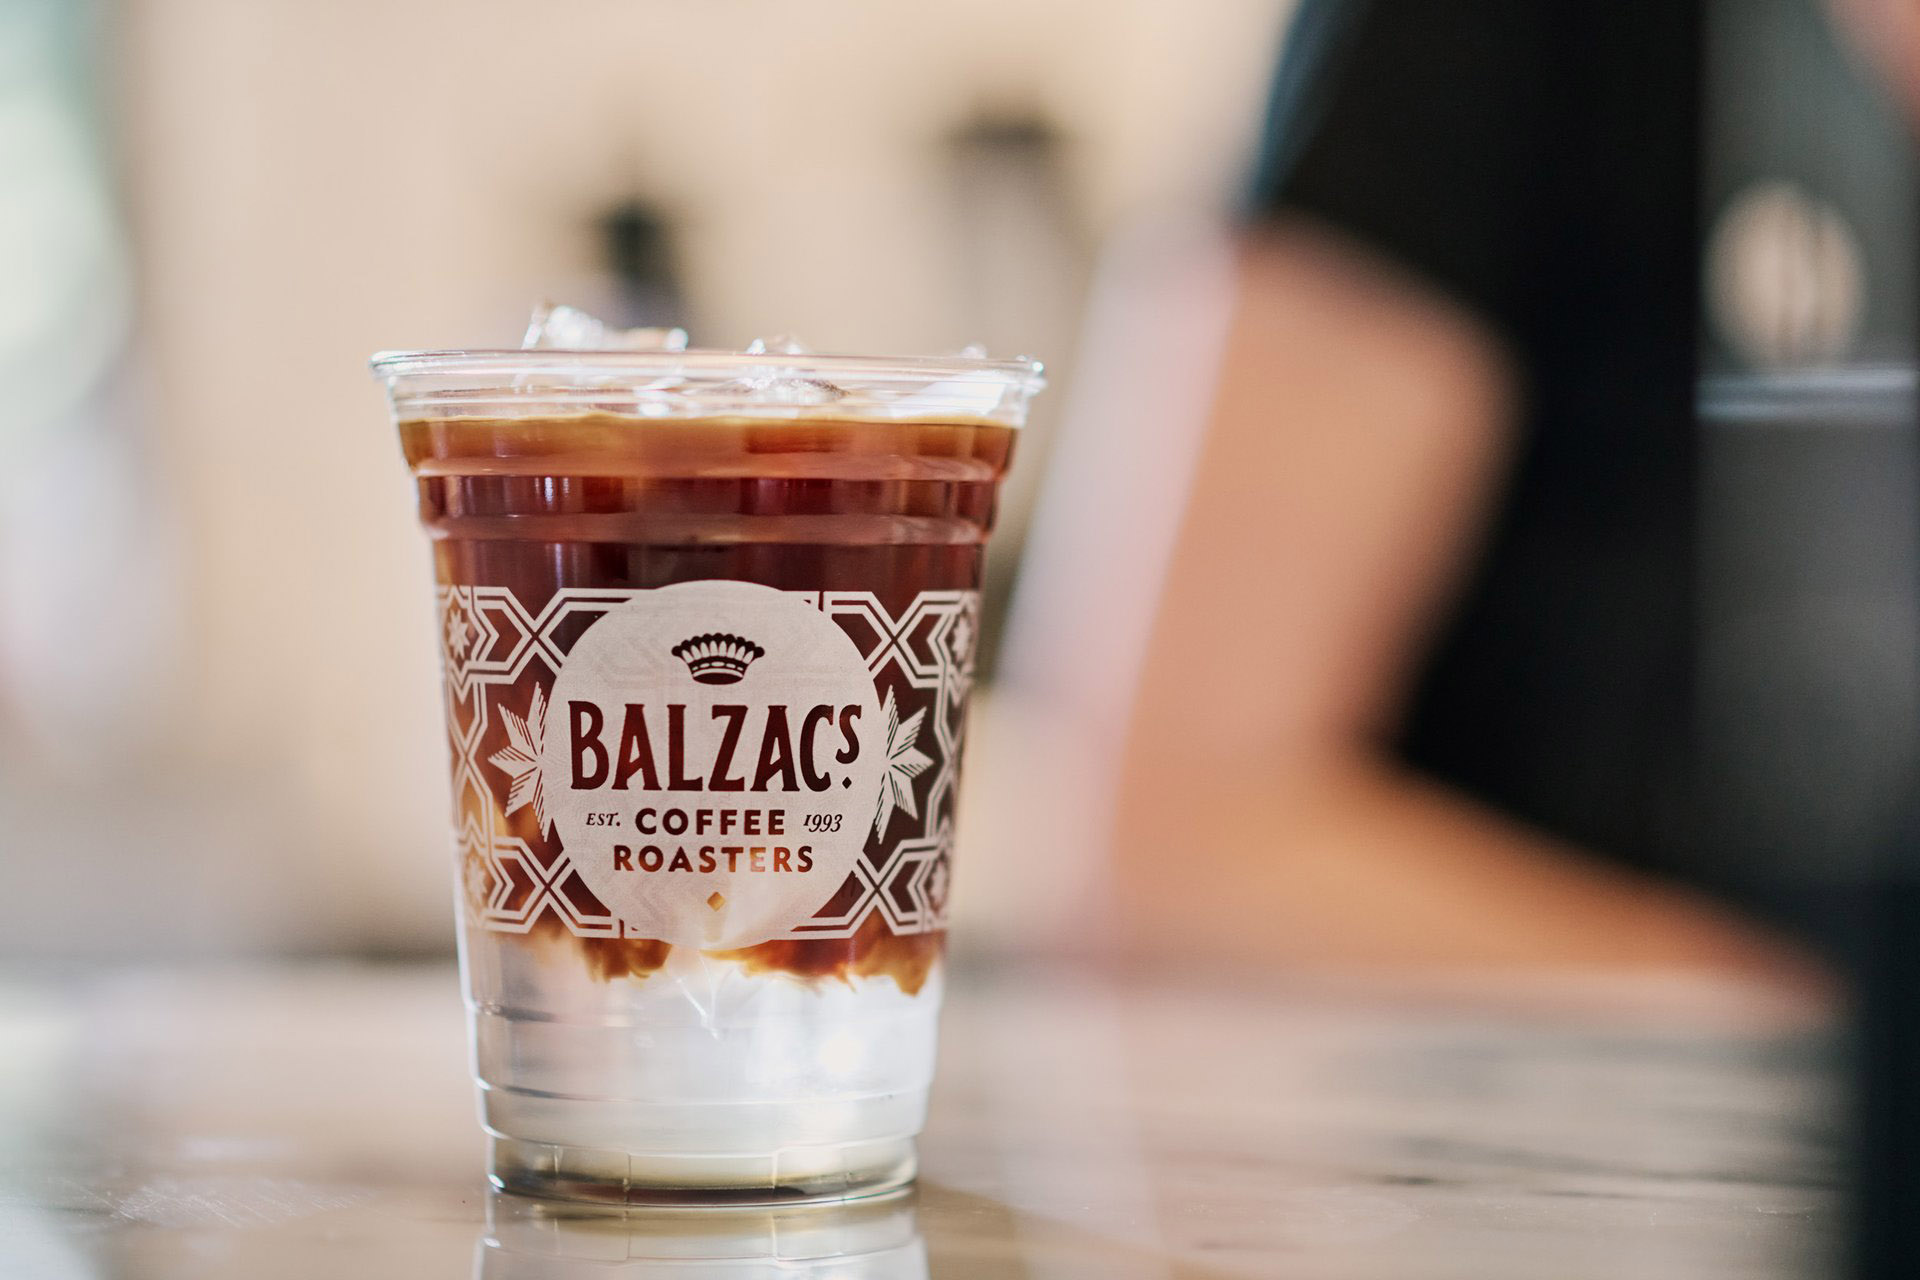 An iced coffee in a Balzac's branded cup on a countertop.